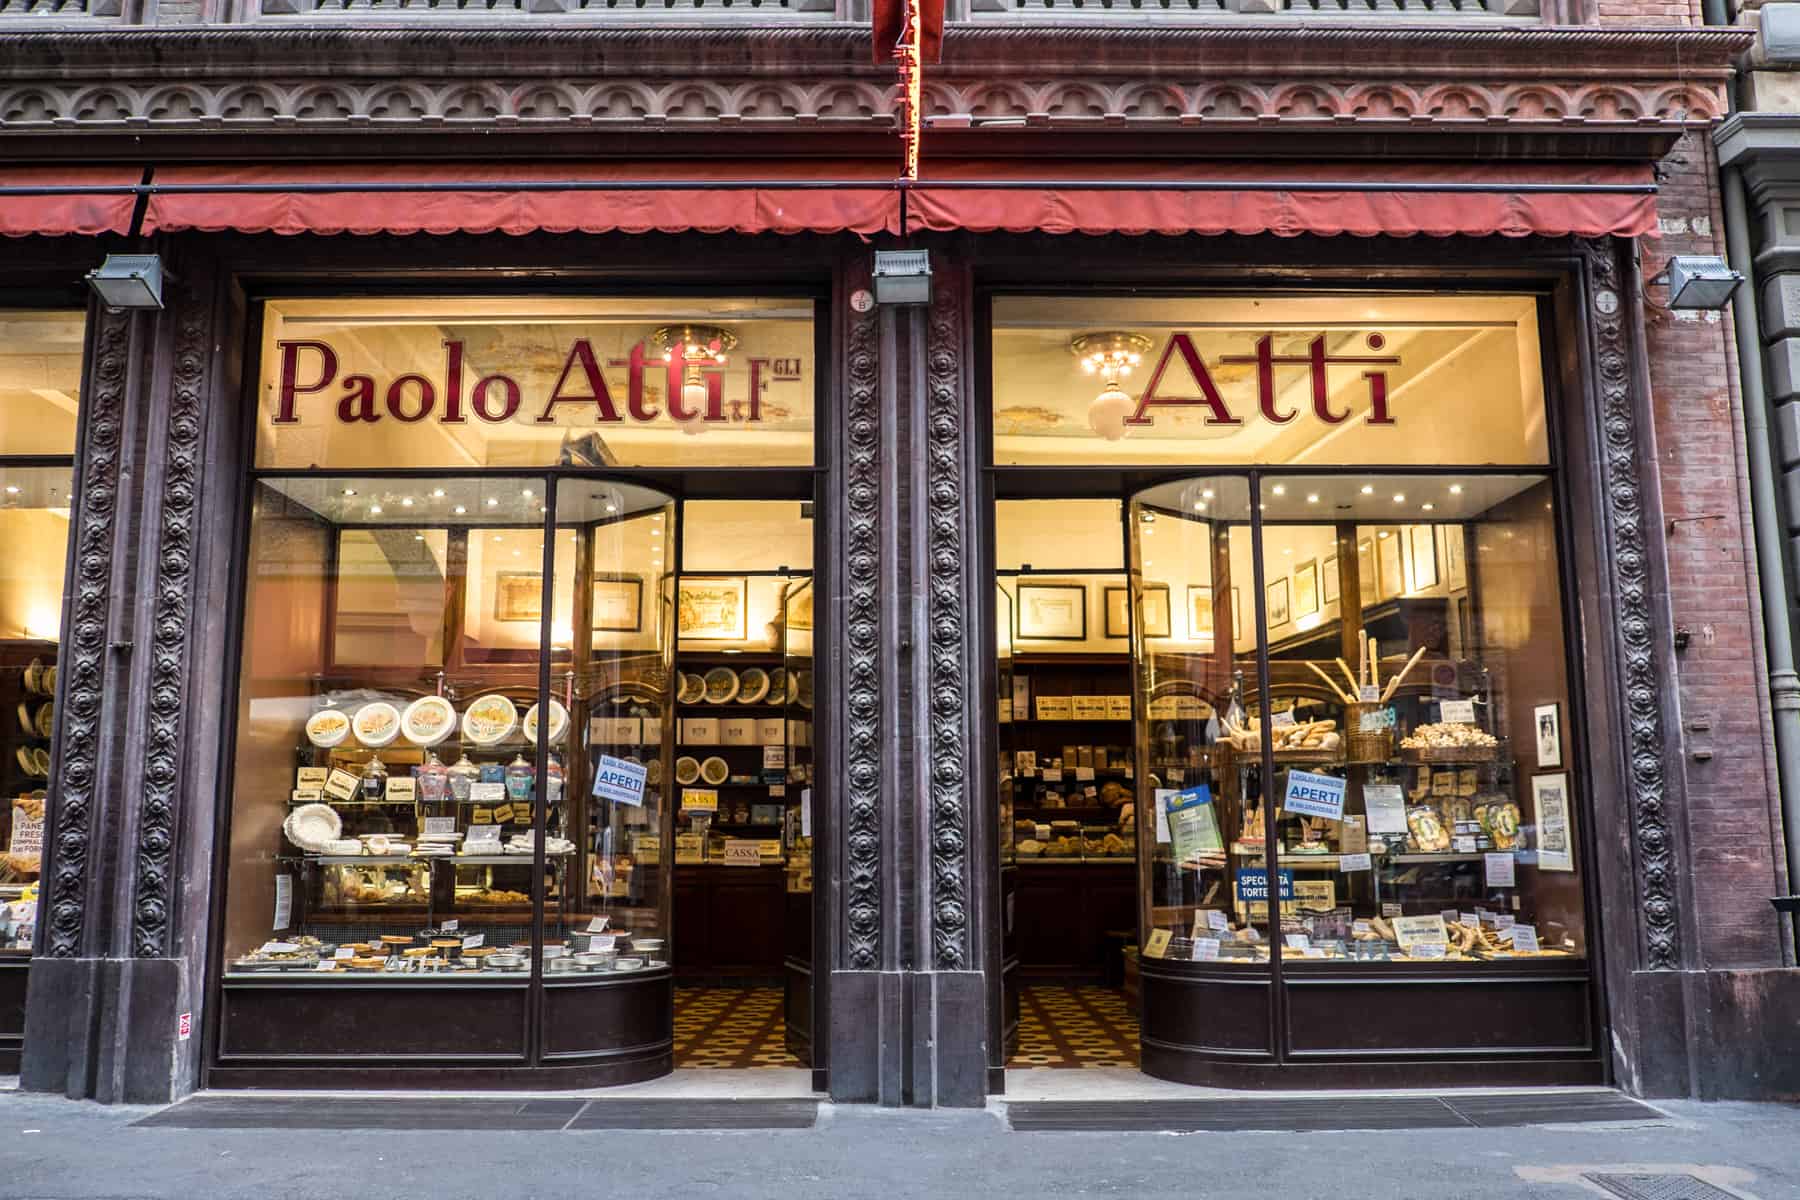 A glass fronted, dark wooden panelled store front filled with food goods, with the words: "Paolo Atti. F. Atti" overhead. 